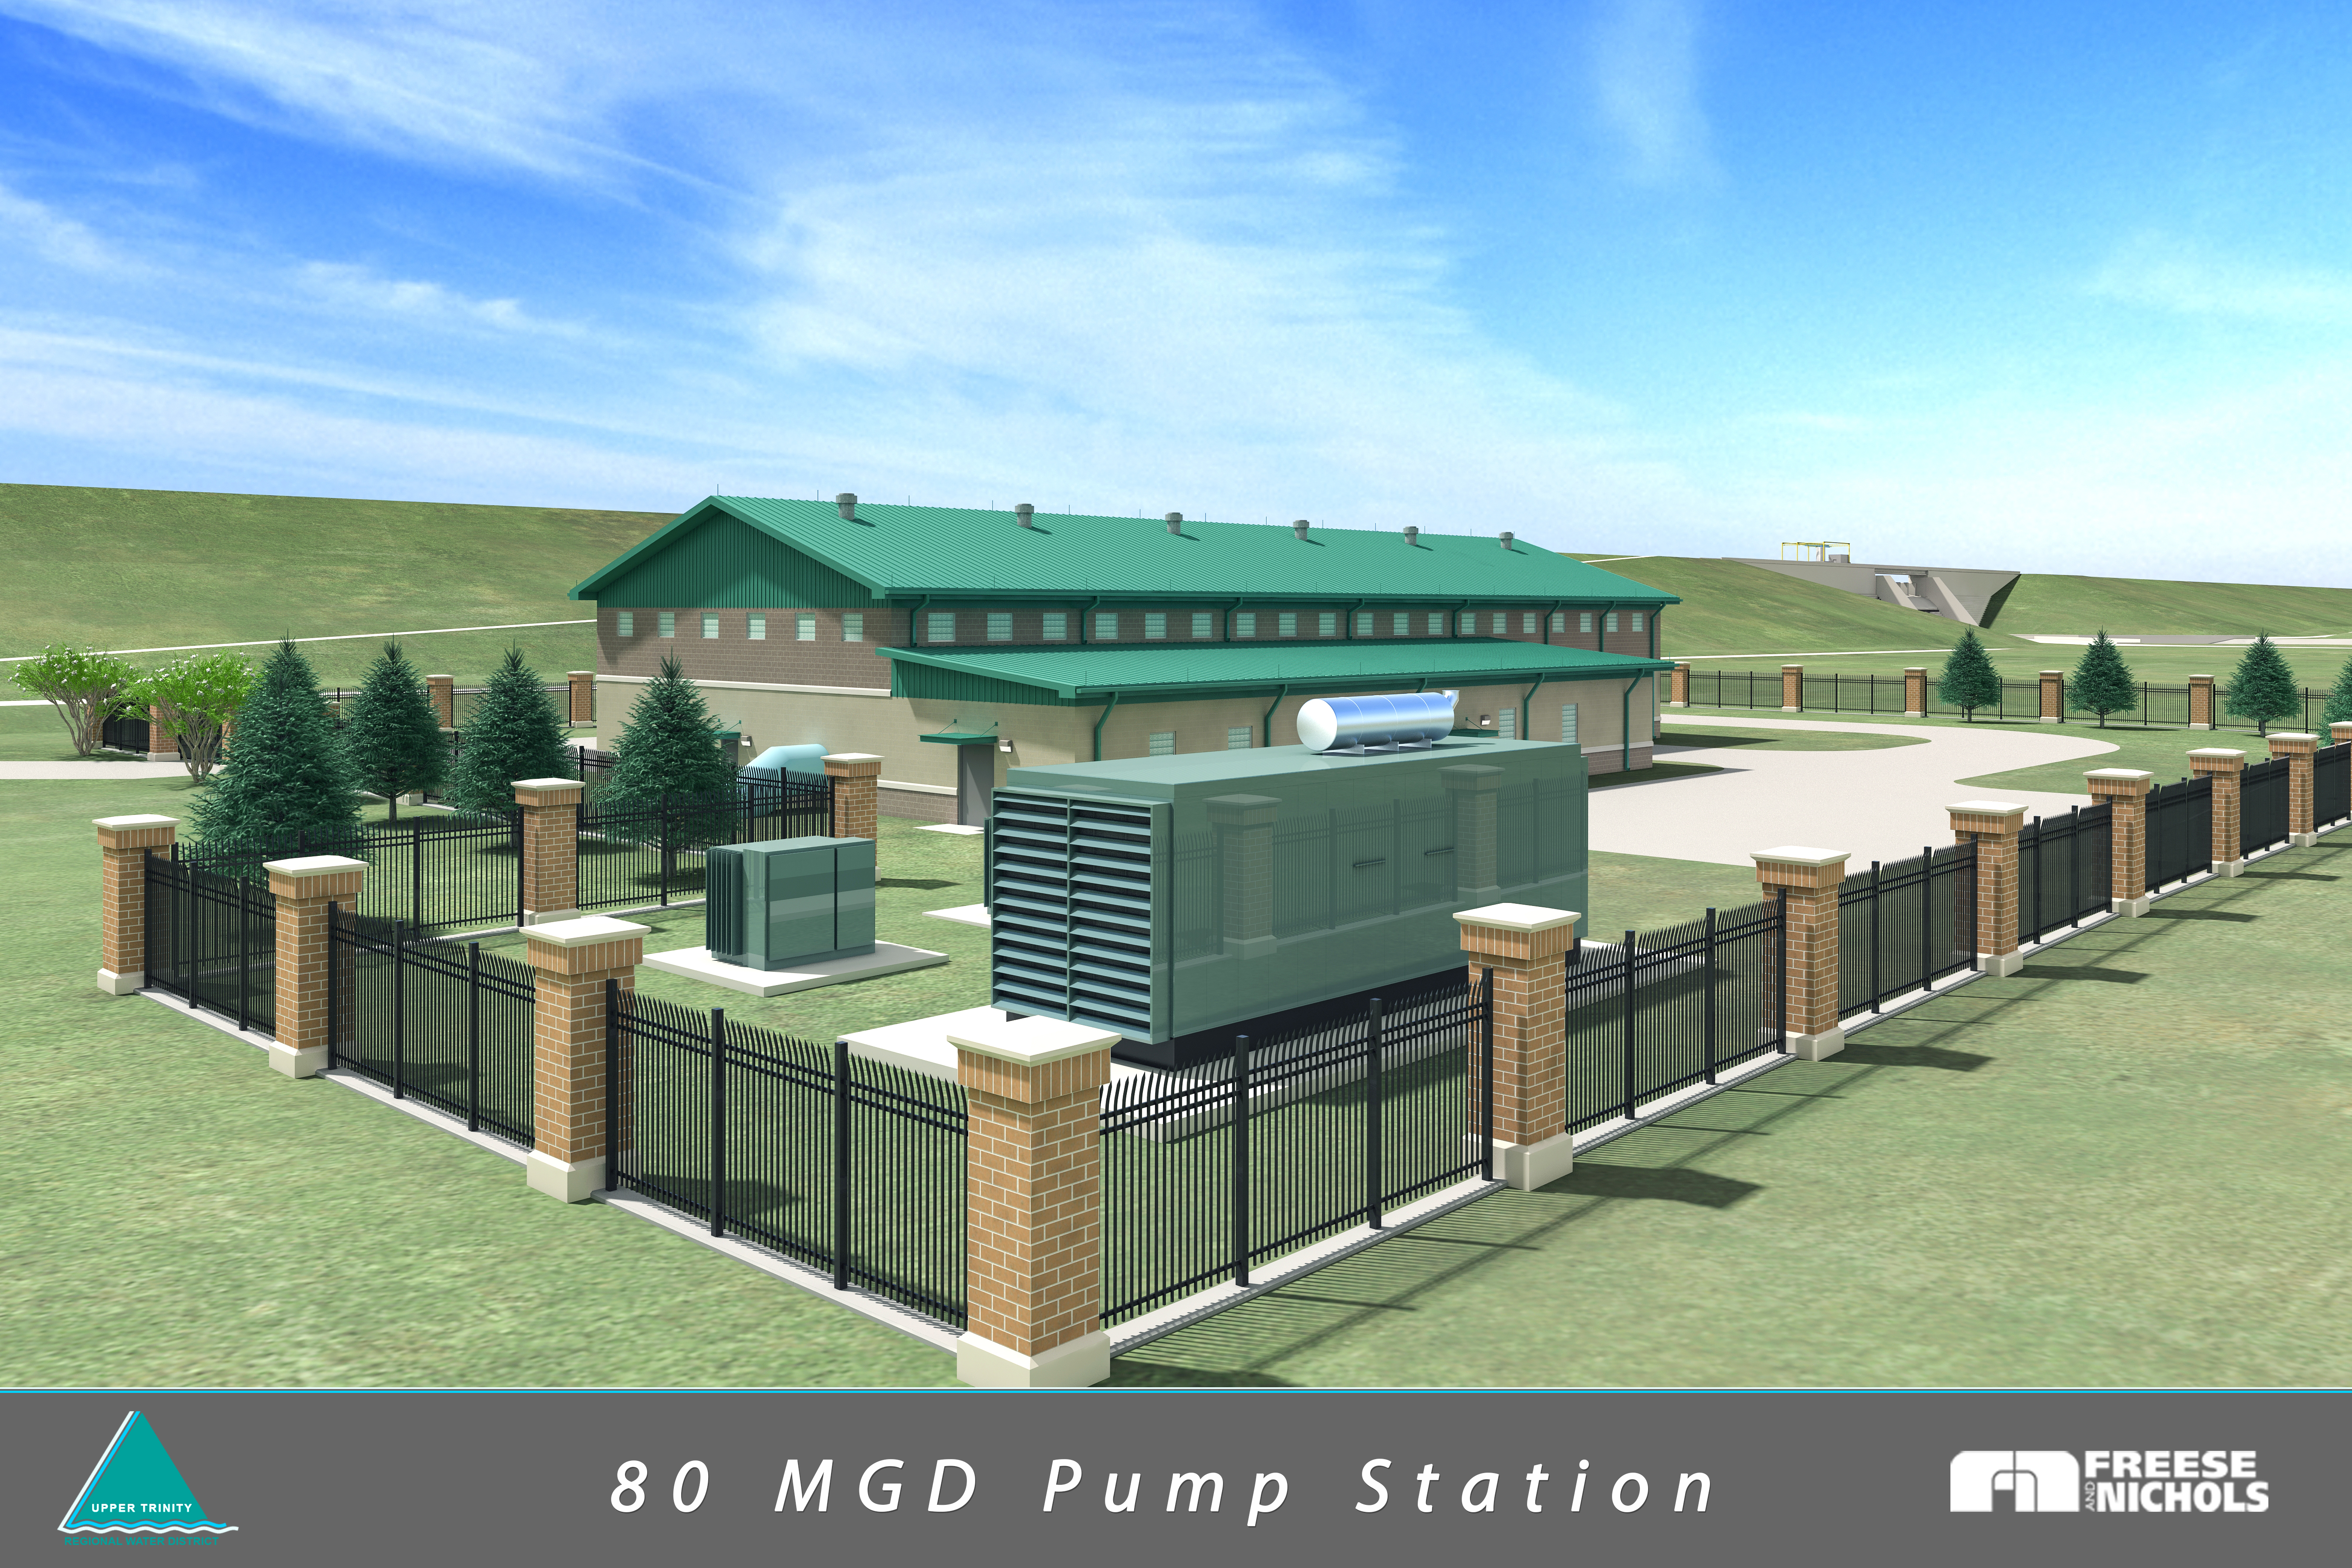 Up Close Rendering of the 80 MGD Pump Station Sept. 2021